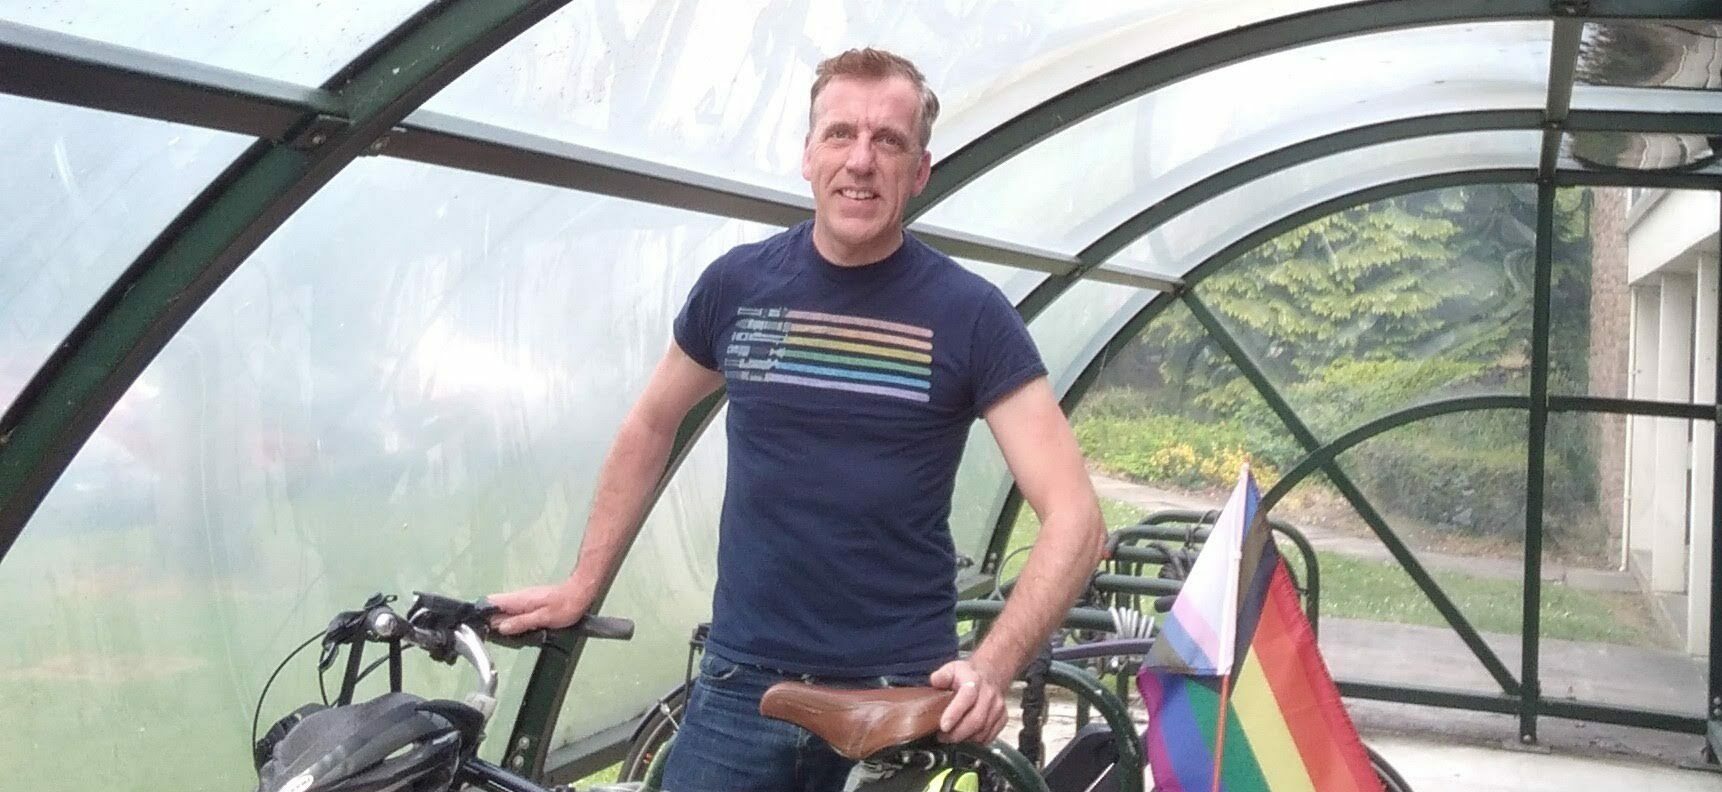 Rob standing behind his bicycle in a bike shelter, a Pride flag in his pannier